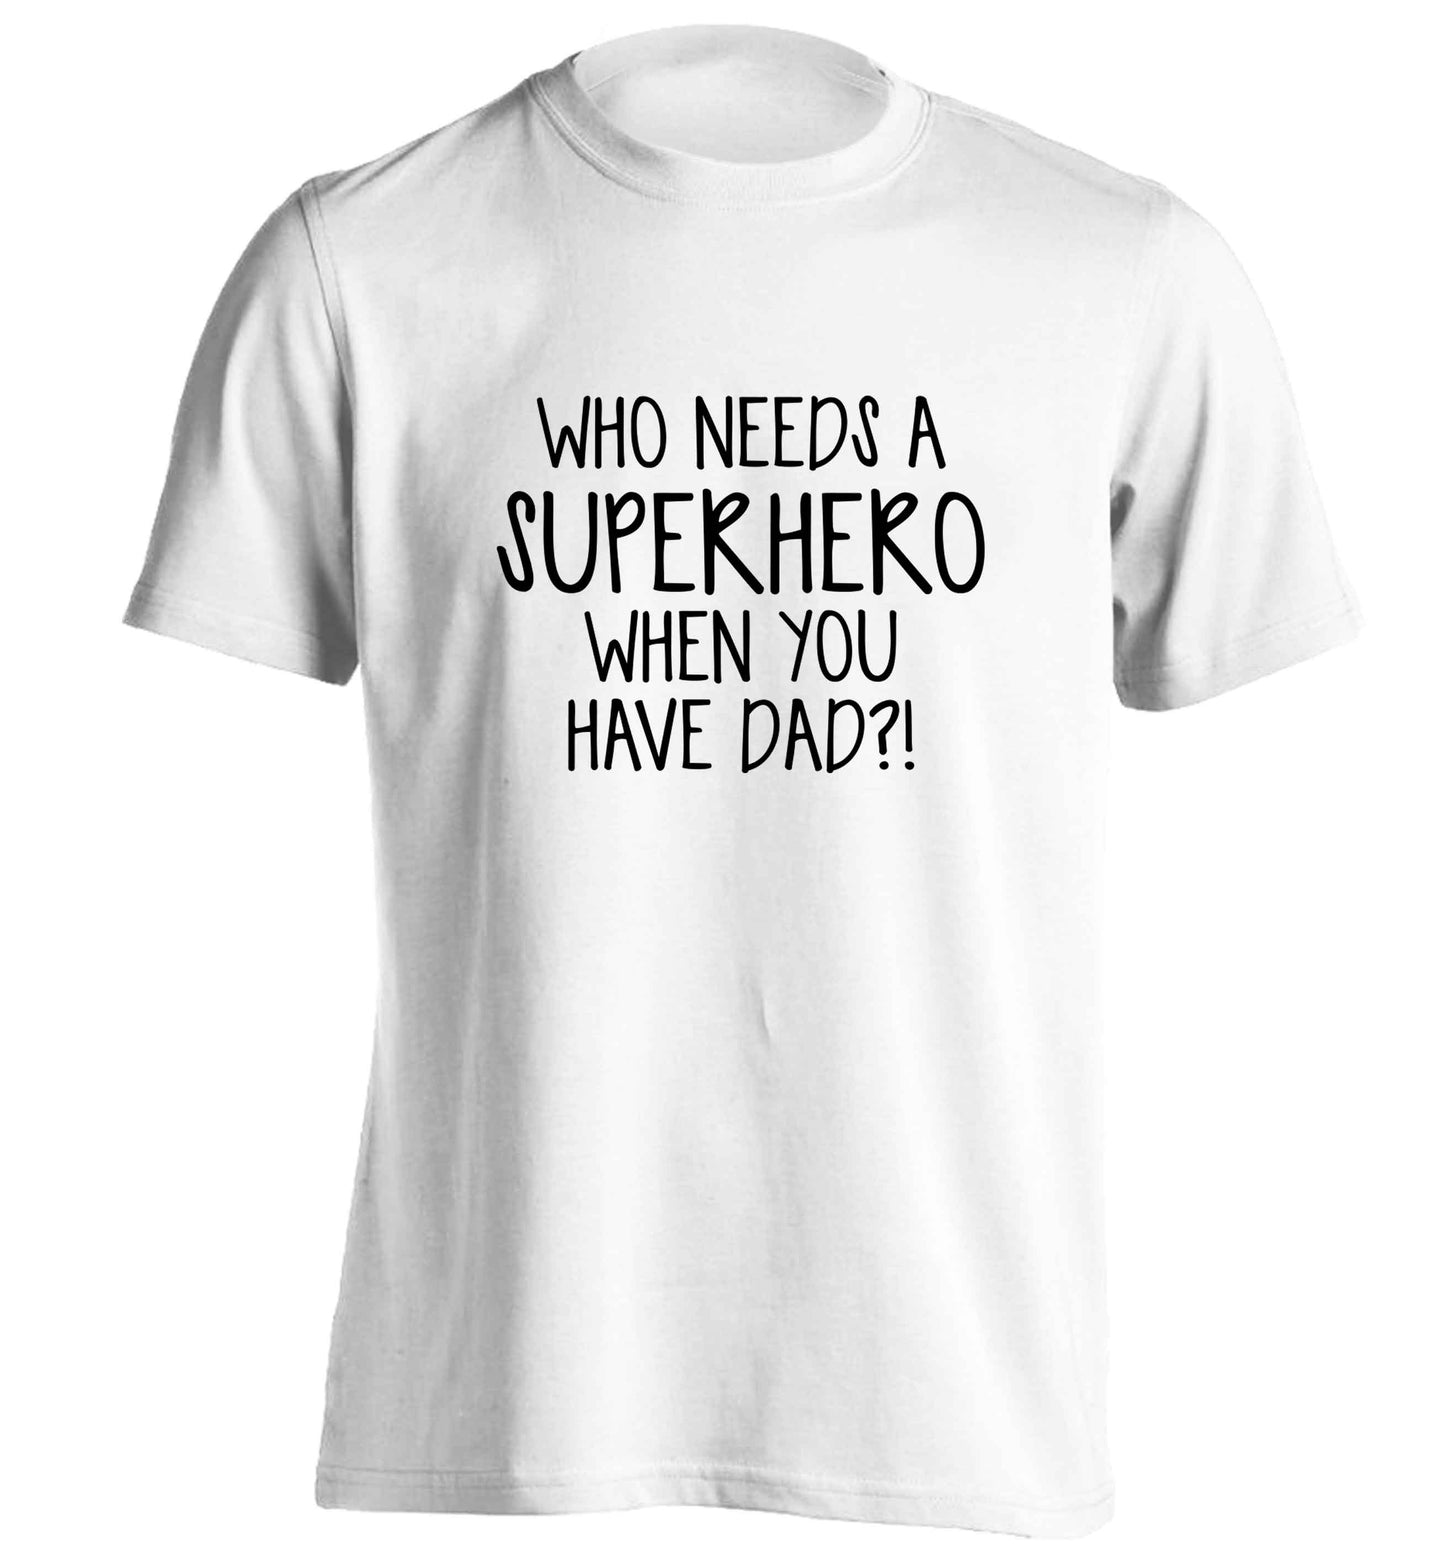 Who needs a superhero when you have dad! adults unisex white Tshirt 2XL